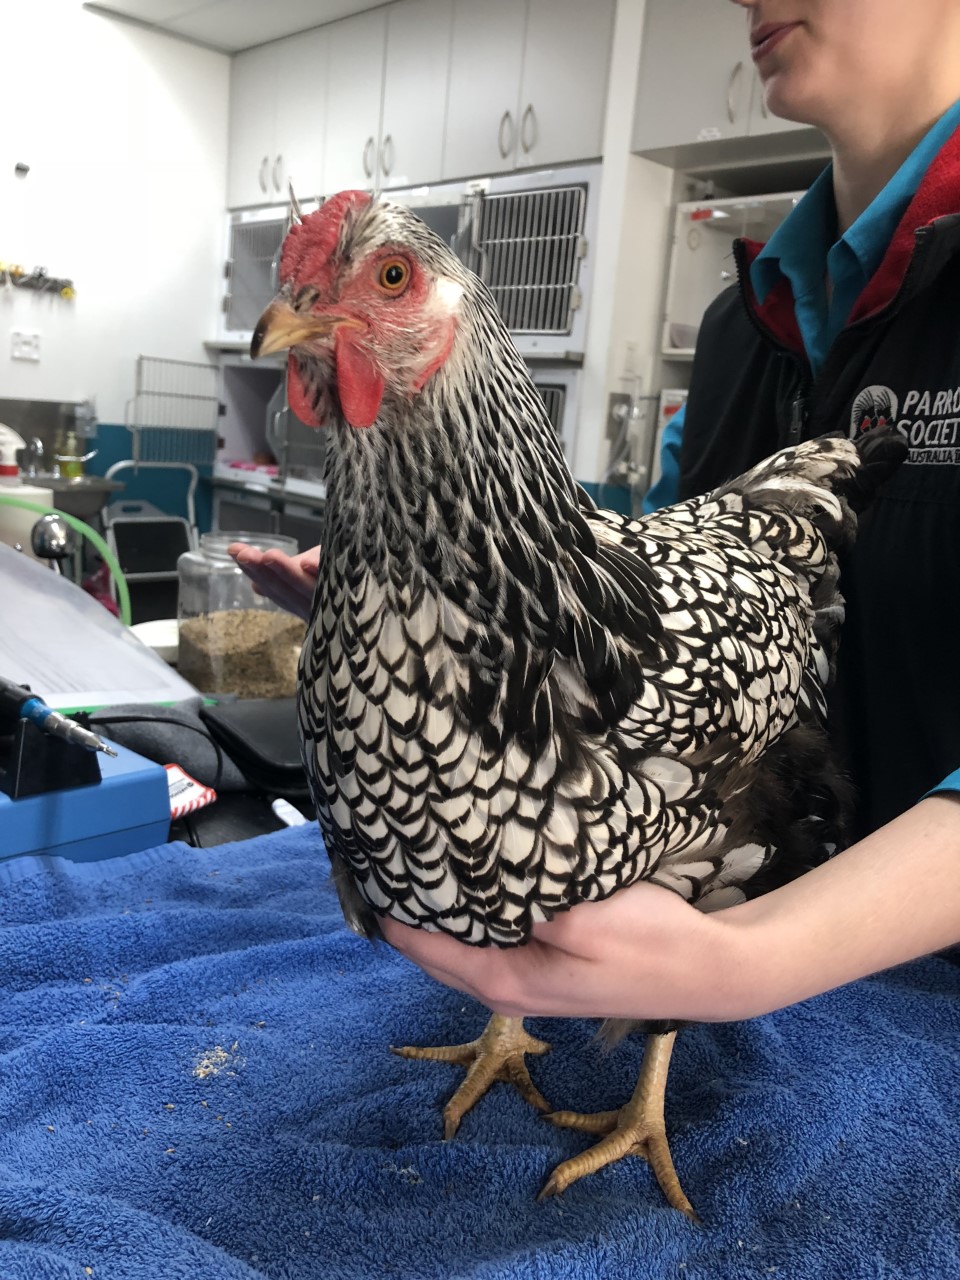 This chicken is being restrained by one of our lovely nurses for her physical exam – what a good girl!